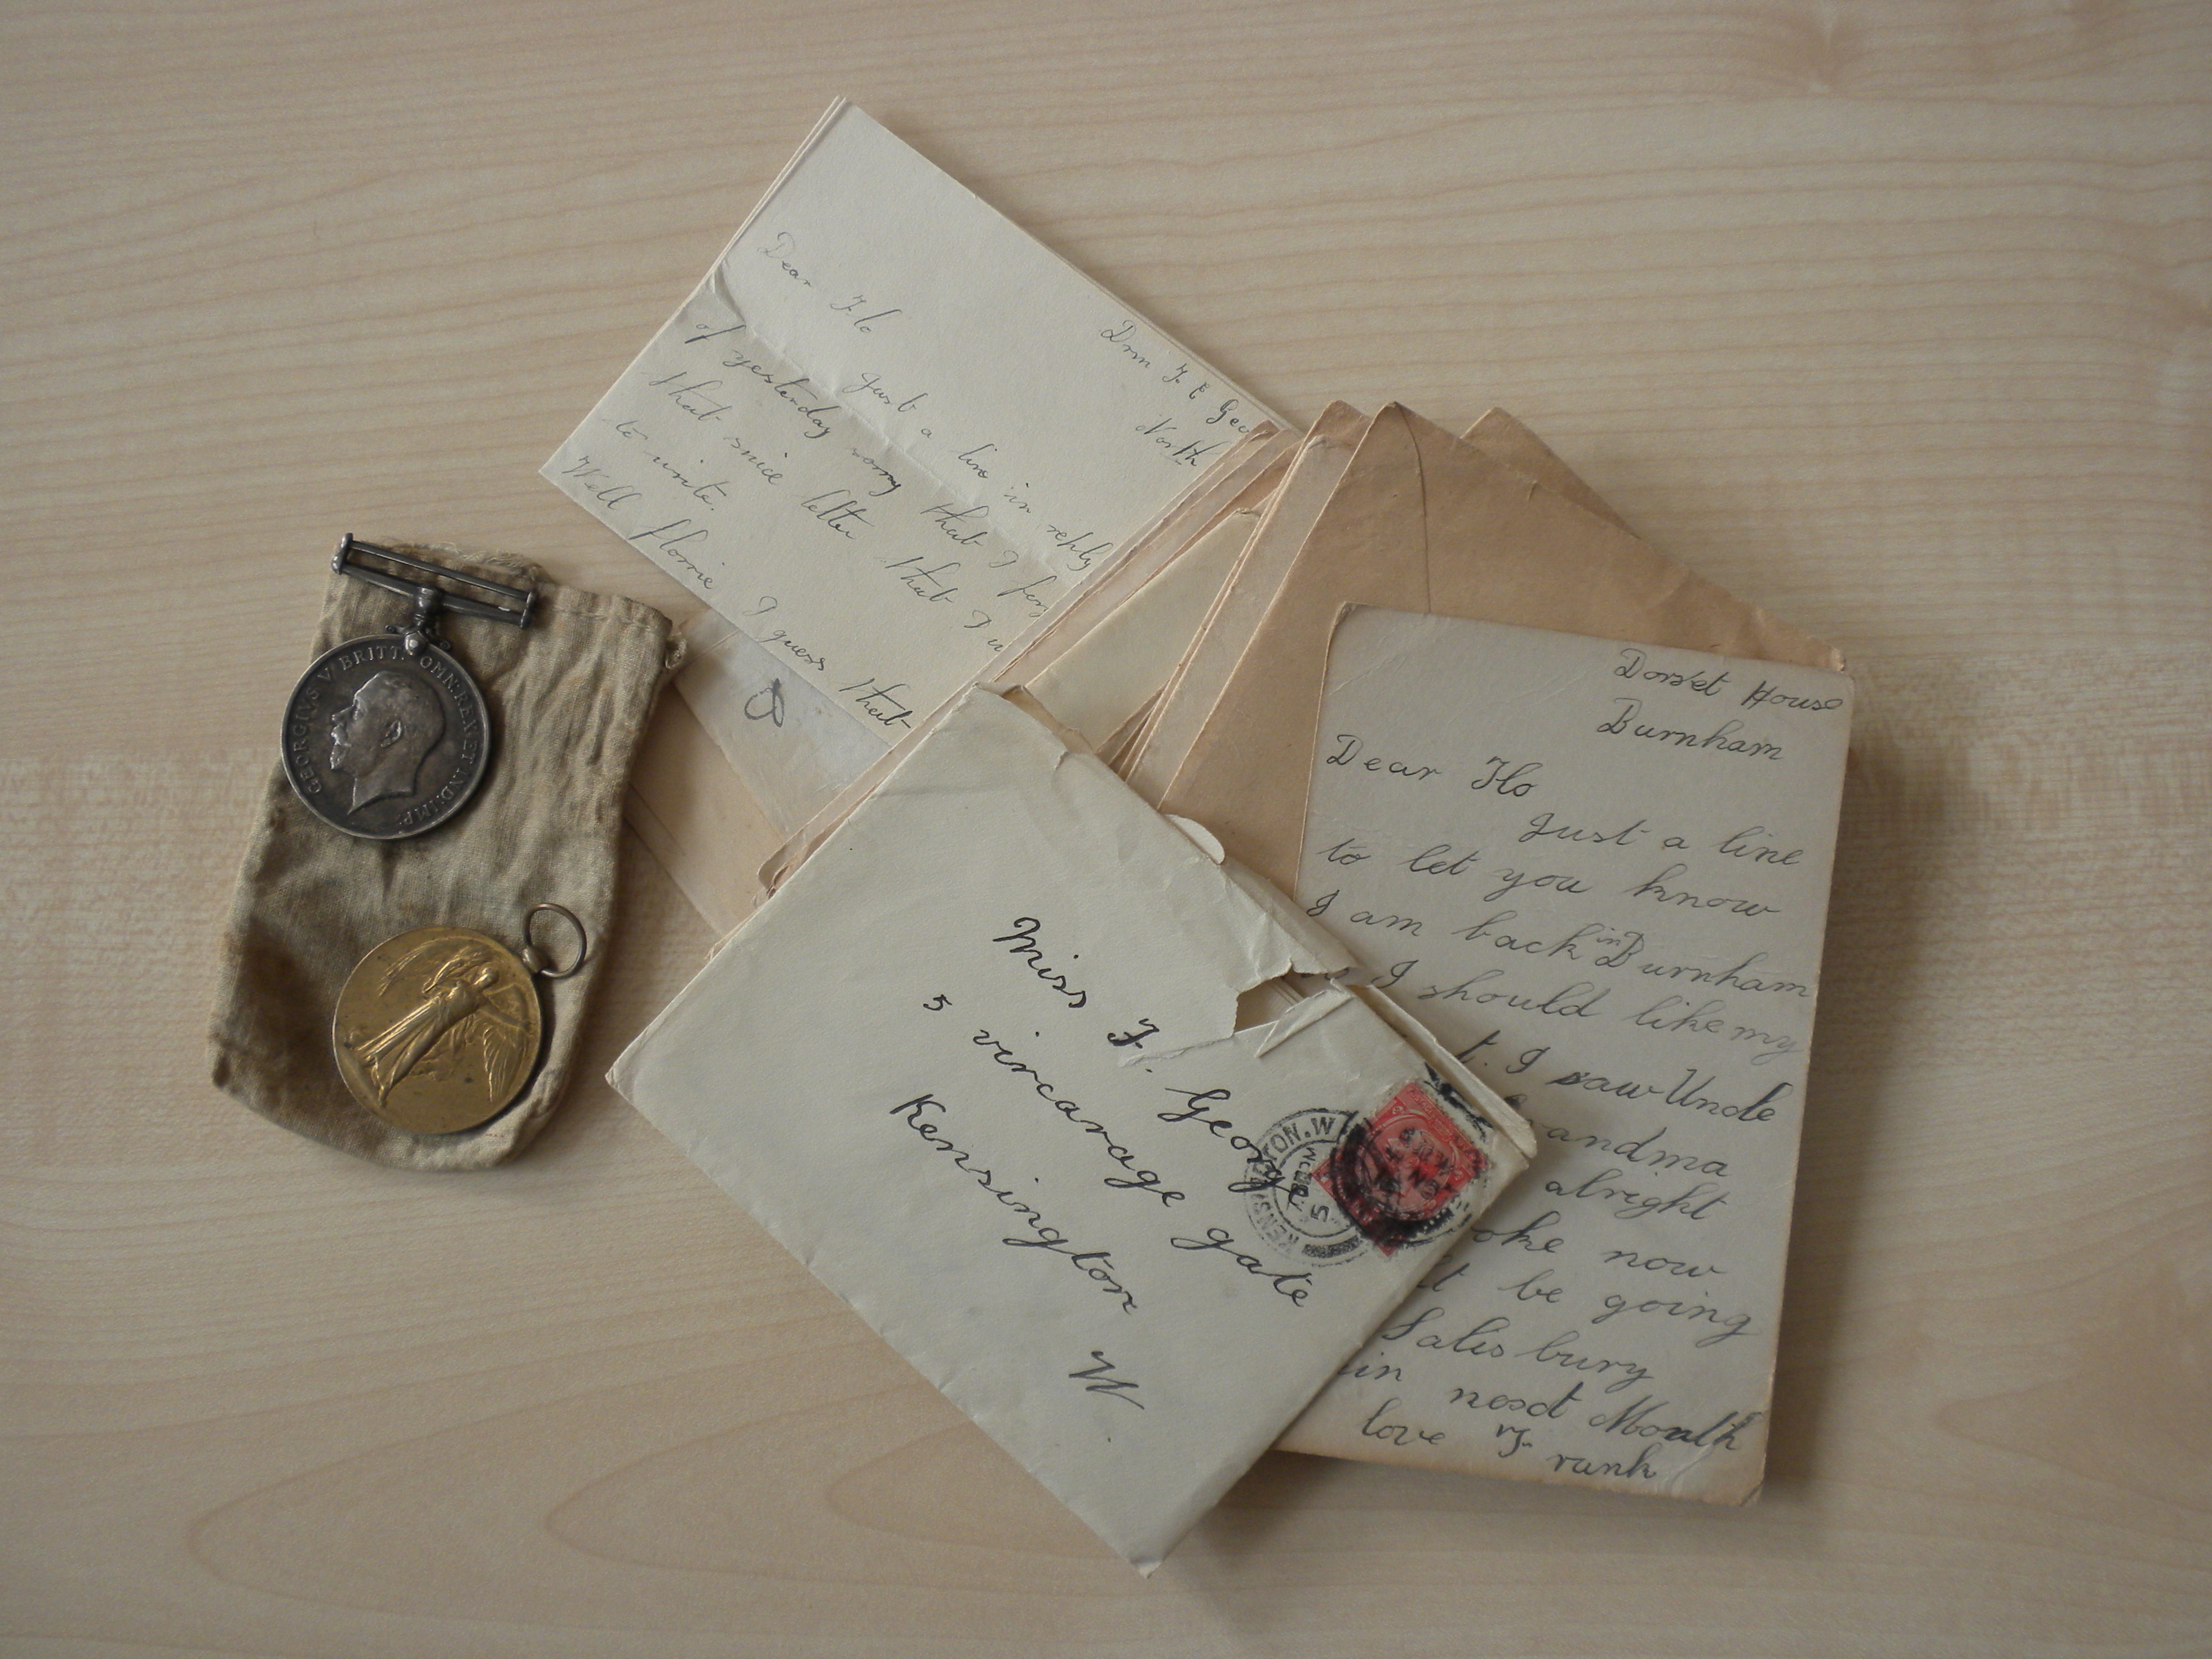 medals and letters from Frank George, buried in Lijssenthoek